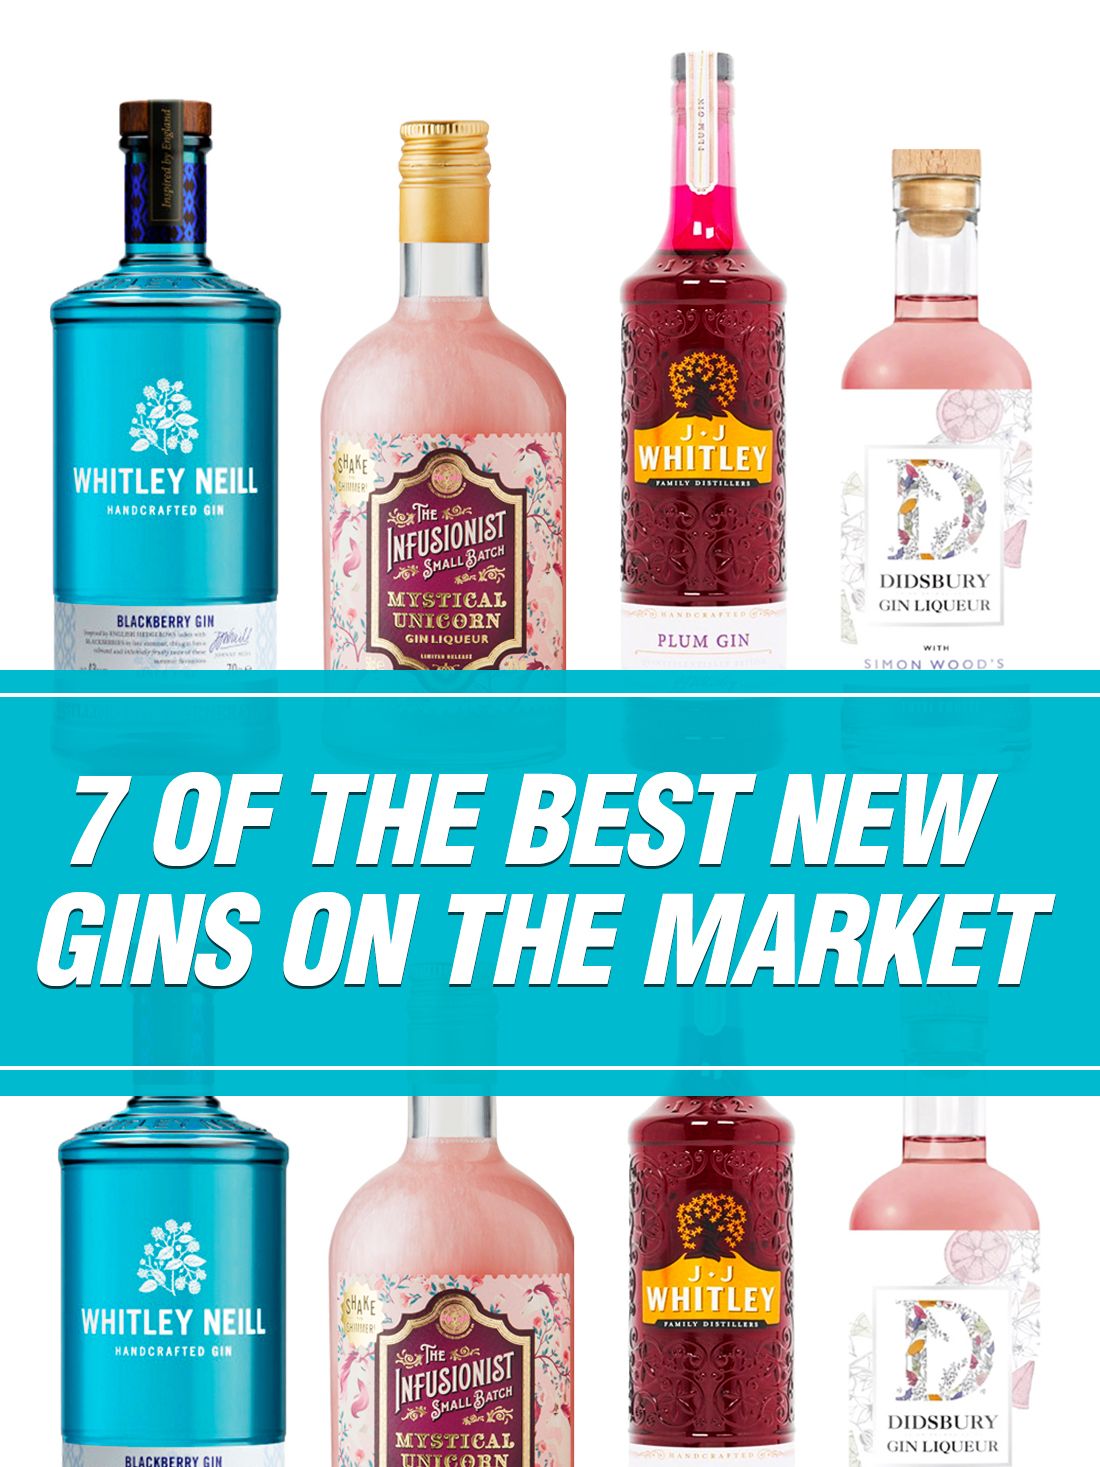 7 of the Best New Gins on the Market